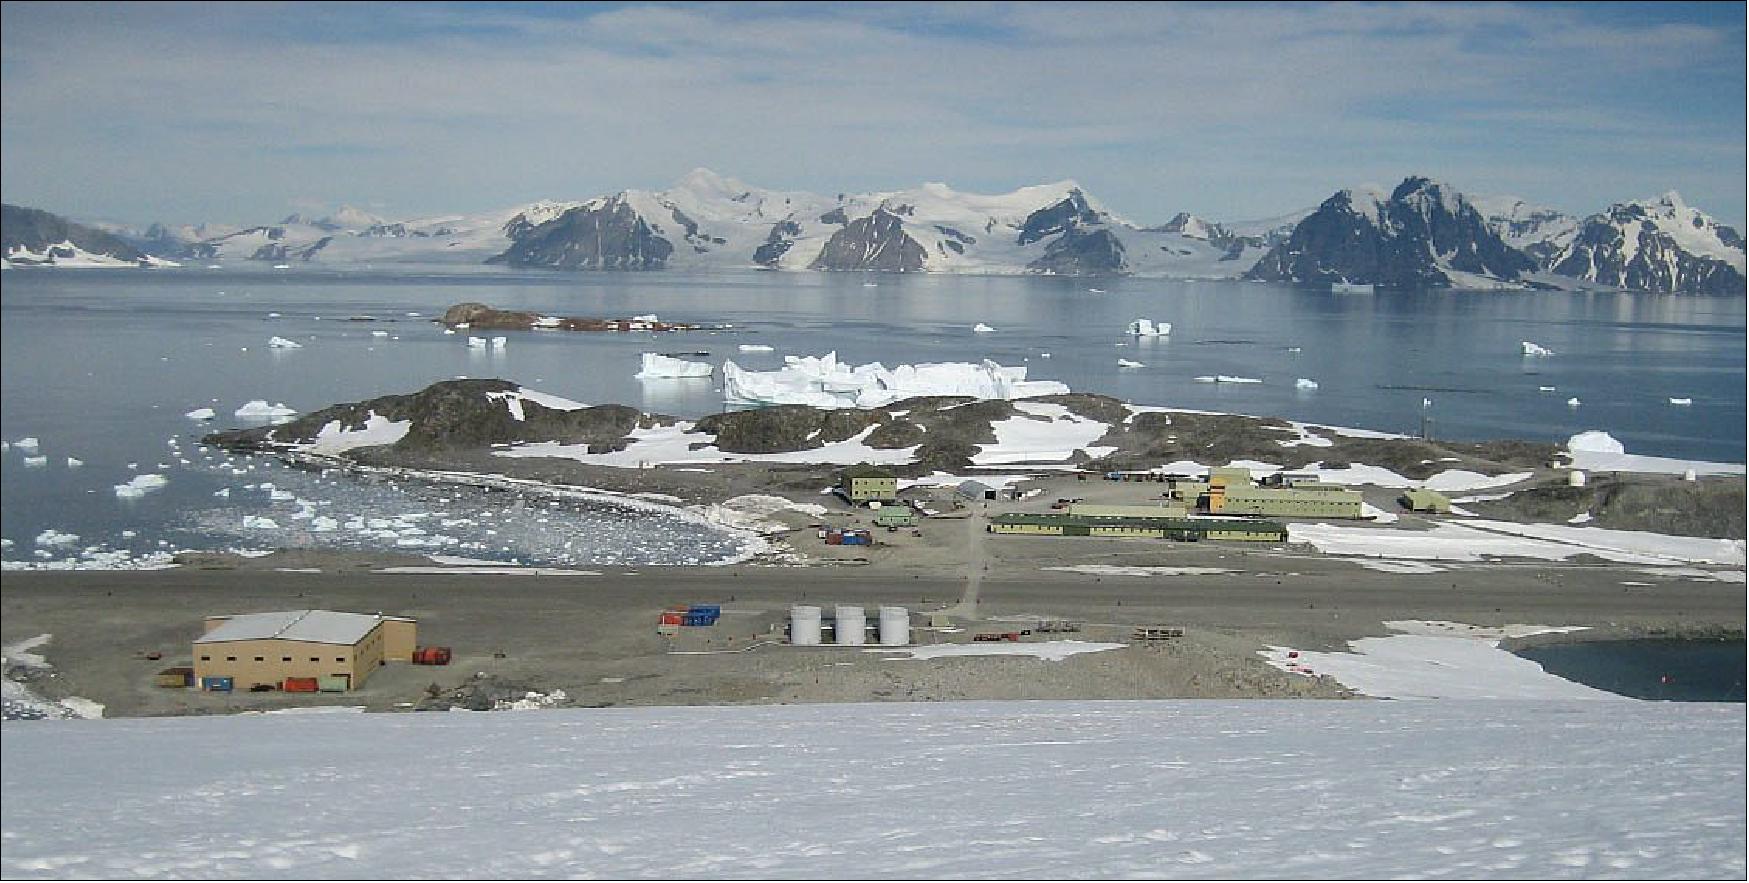 Figure 38: Top: BAS main base Rothera, one of only 3 hard-rock runways in Antarctica. Hanger at lower left (image credit: BAS)